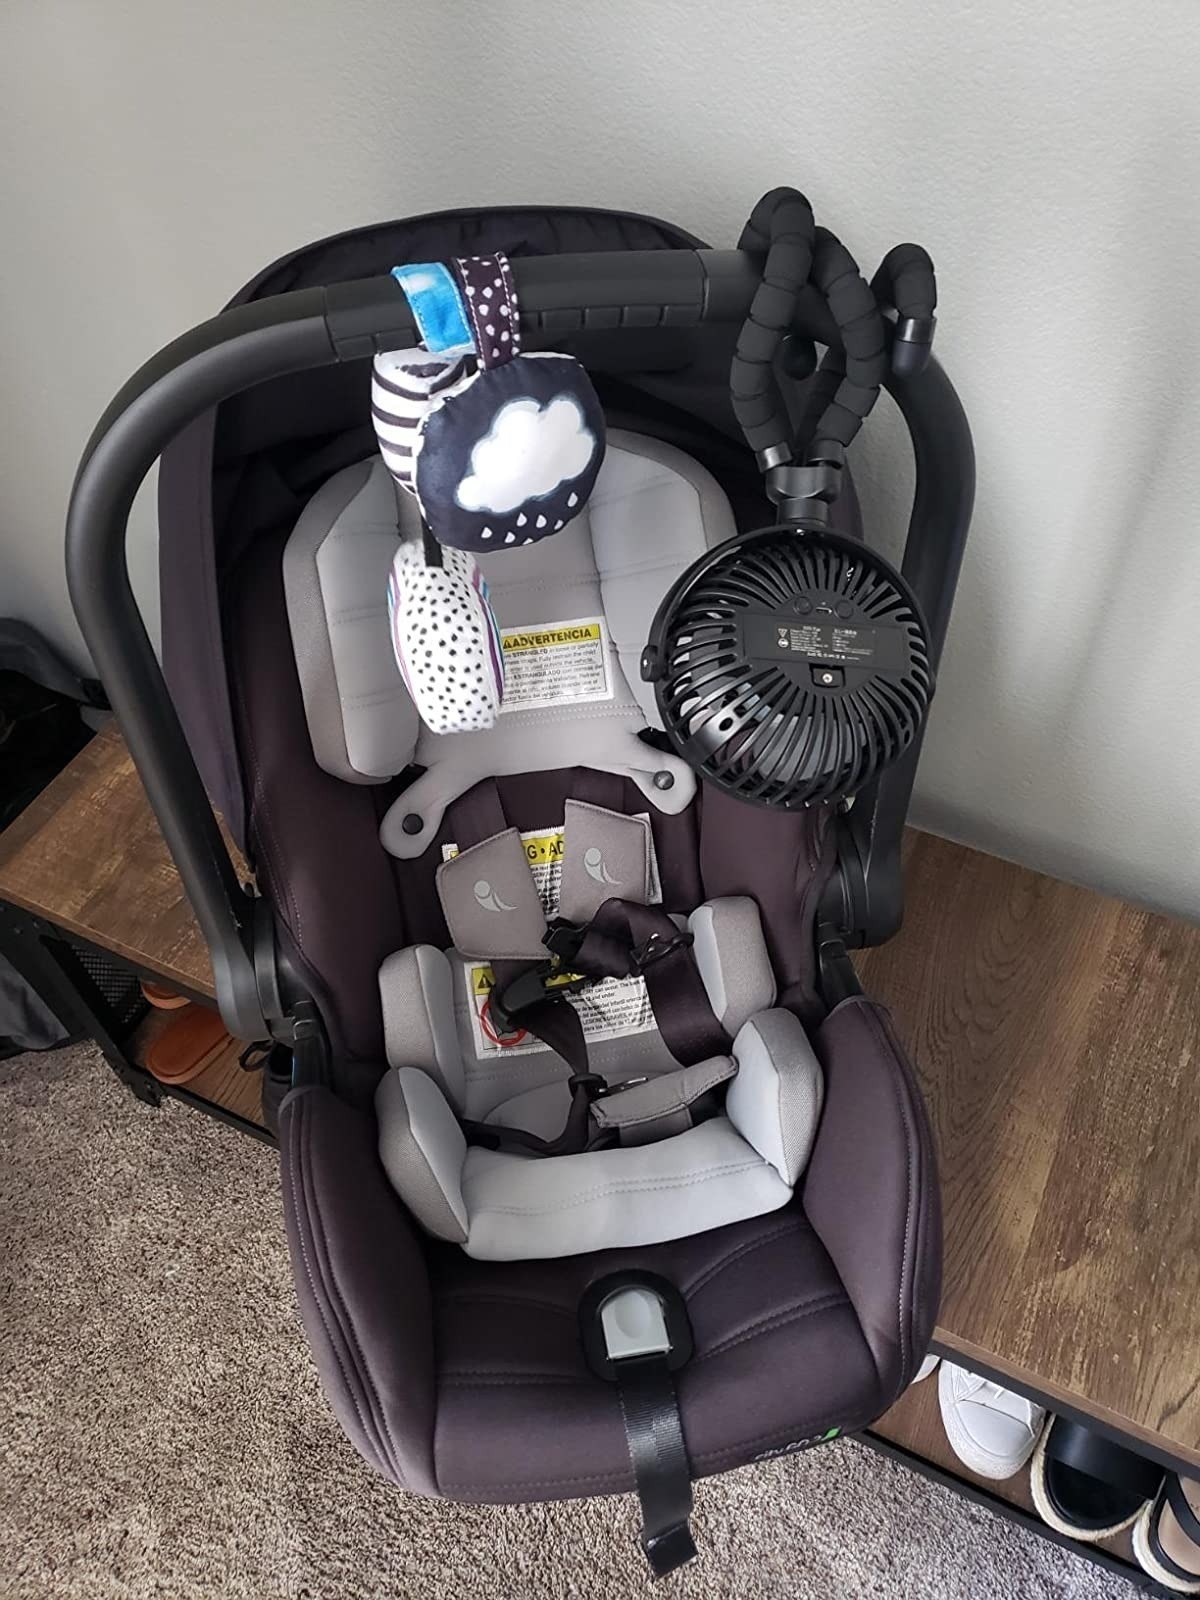 black stroller fan clipped onto handle of black and gray baby carseat